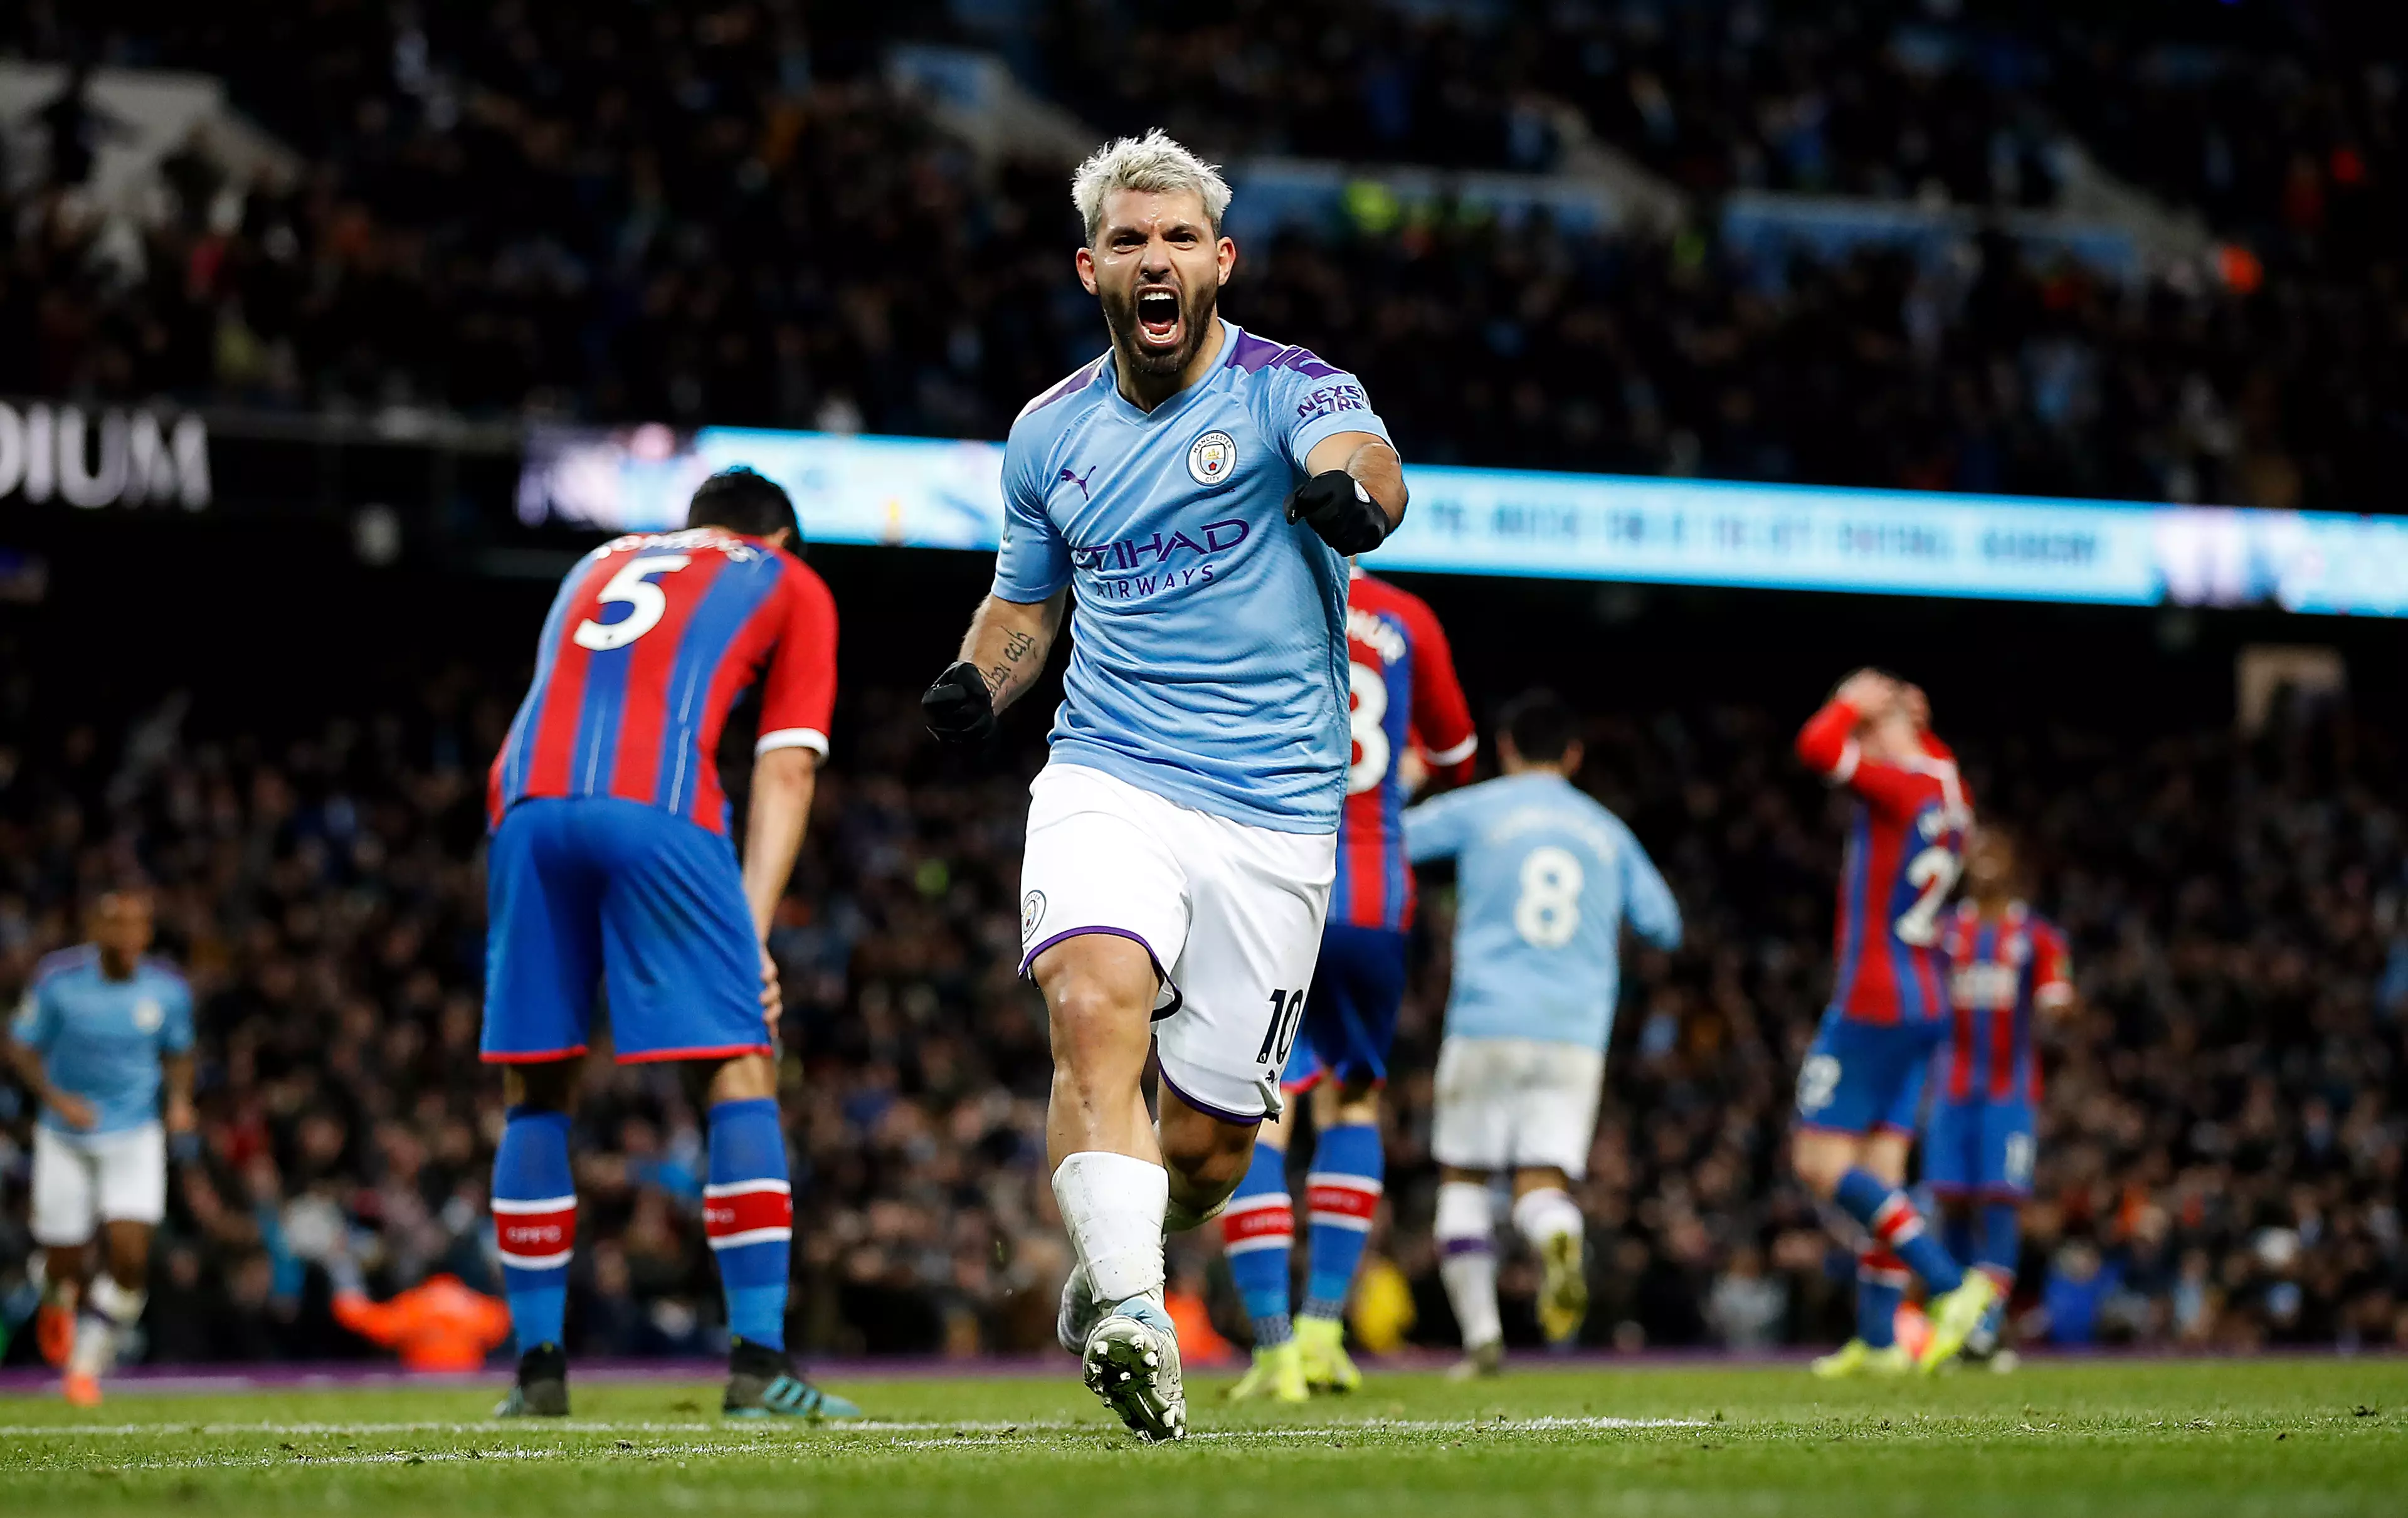 Aguero will soon only have Rooney and Alan Shearer ahead of him. Image: PA Images